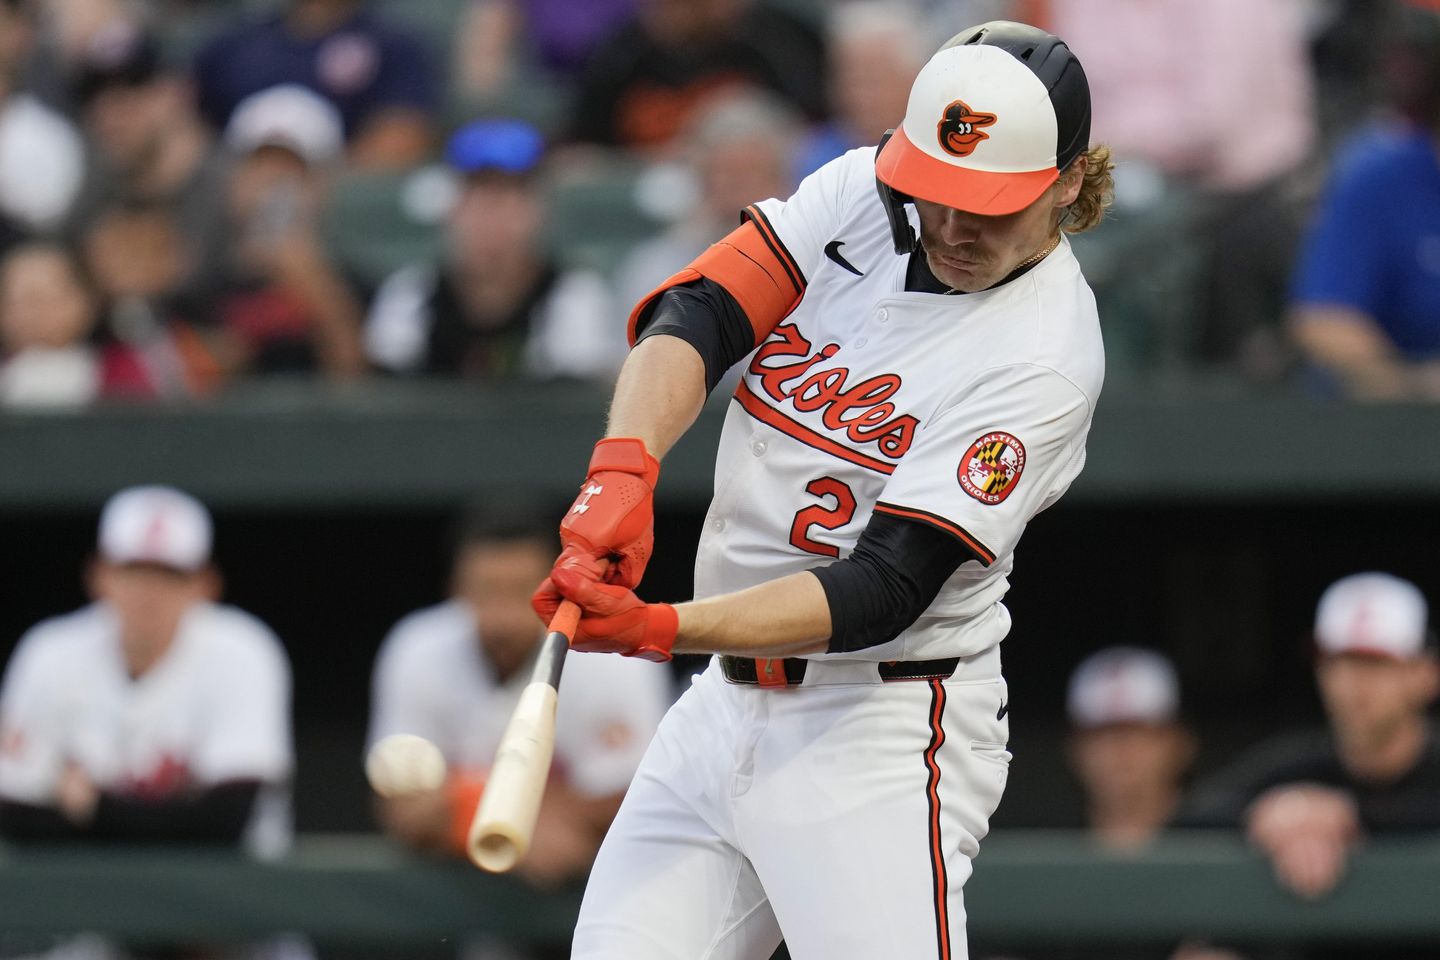 Orioles homer 3 more times in rout of Twins, can sweep the series Wednesday
